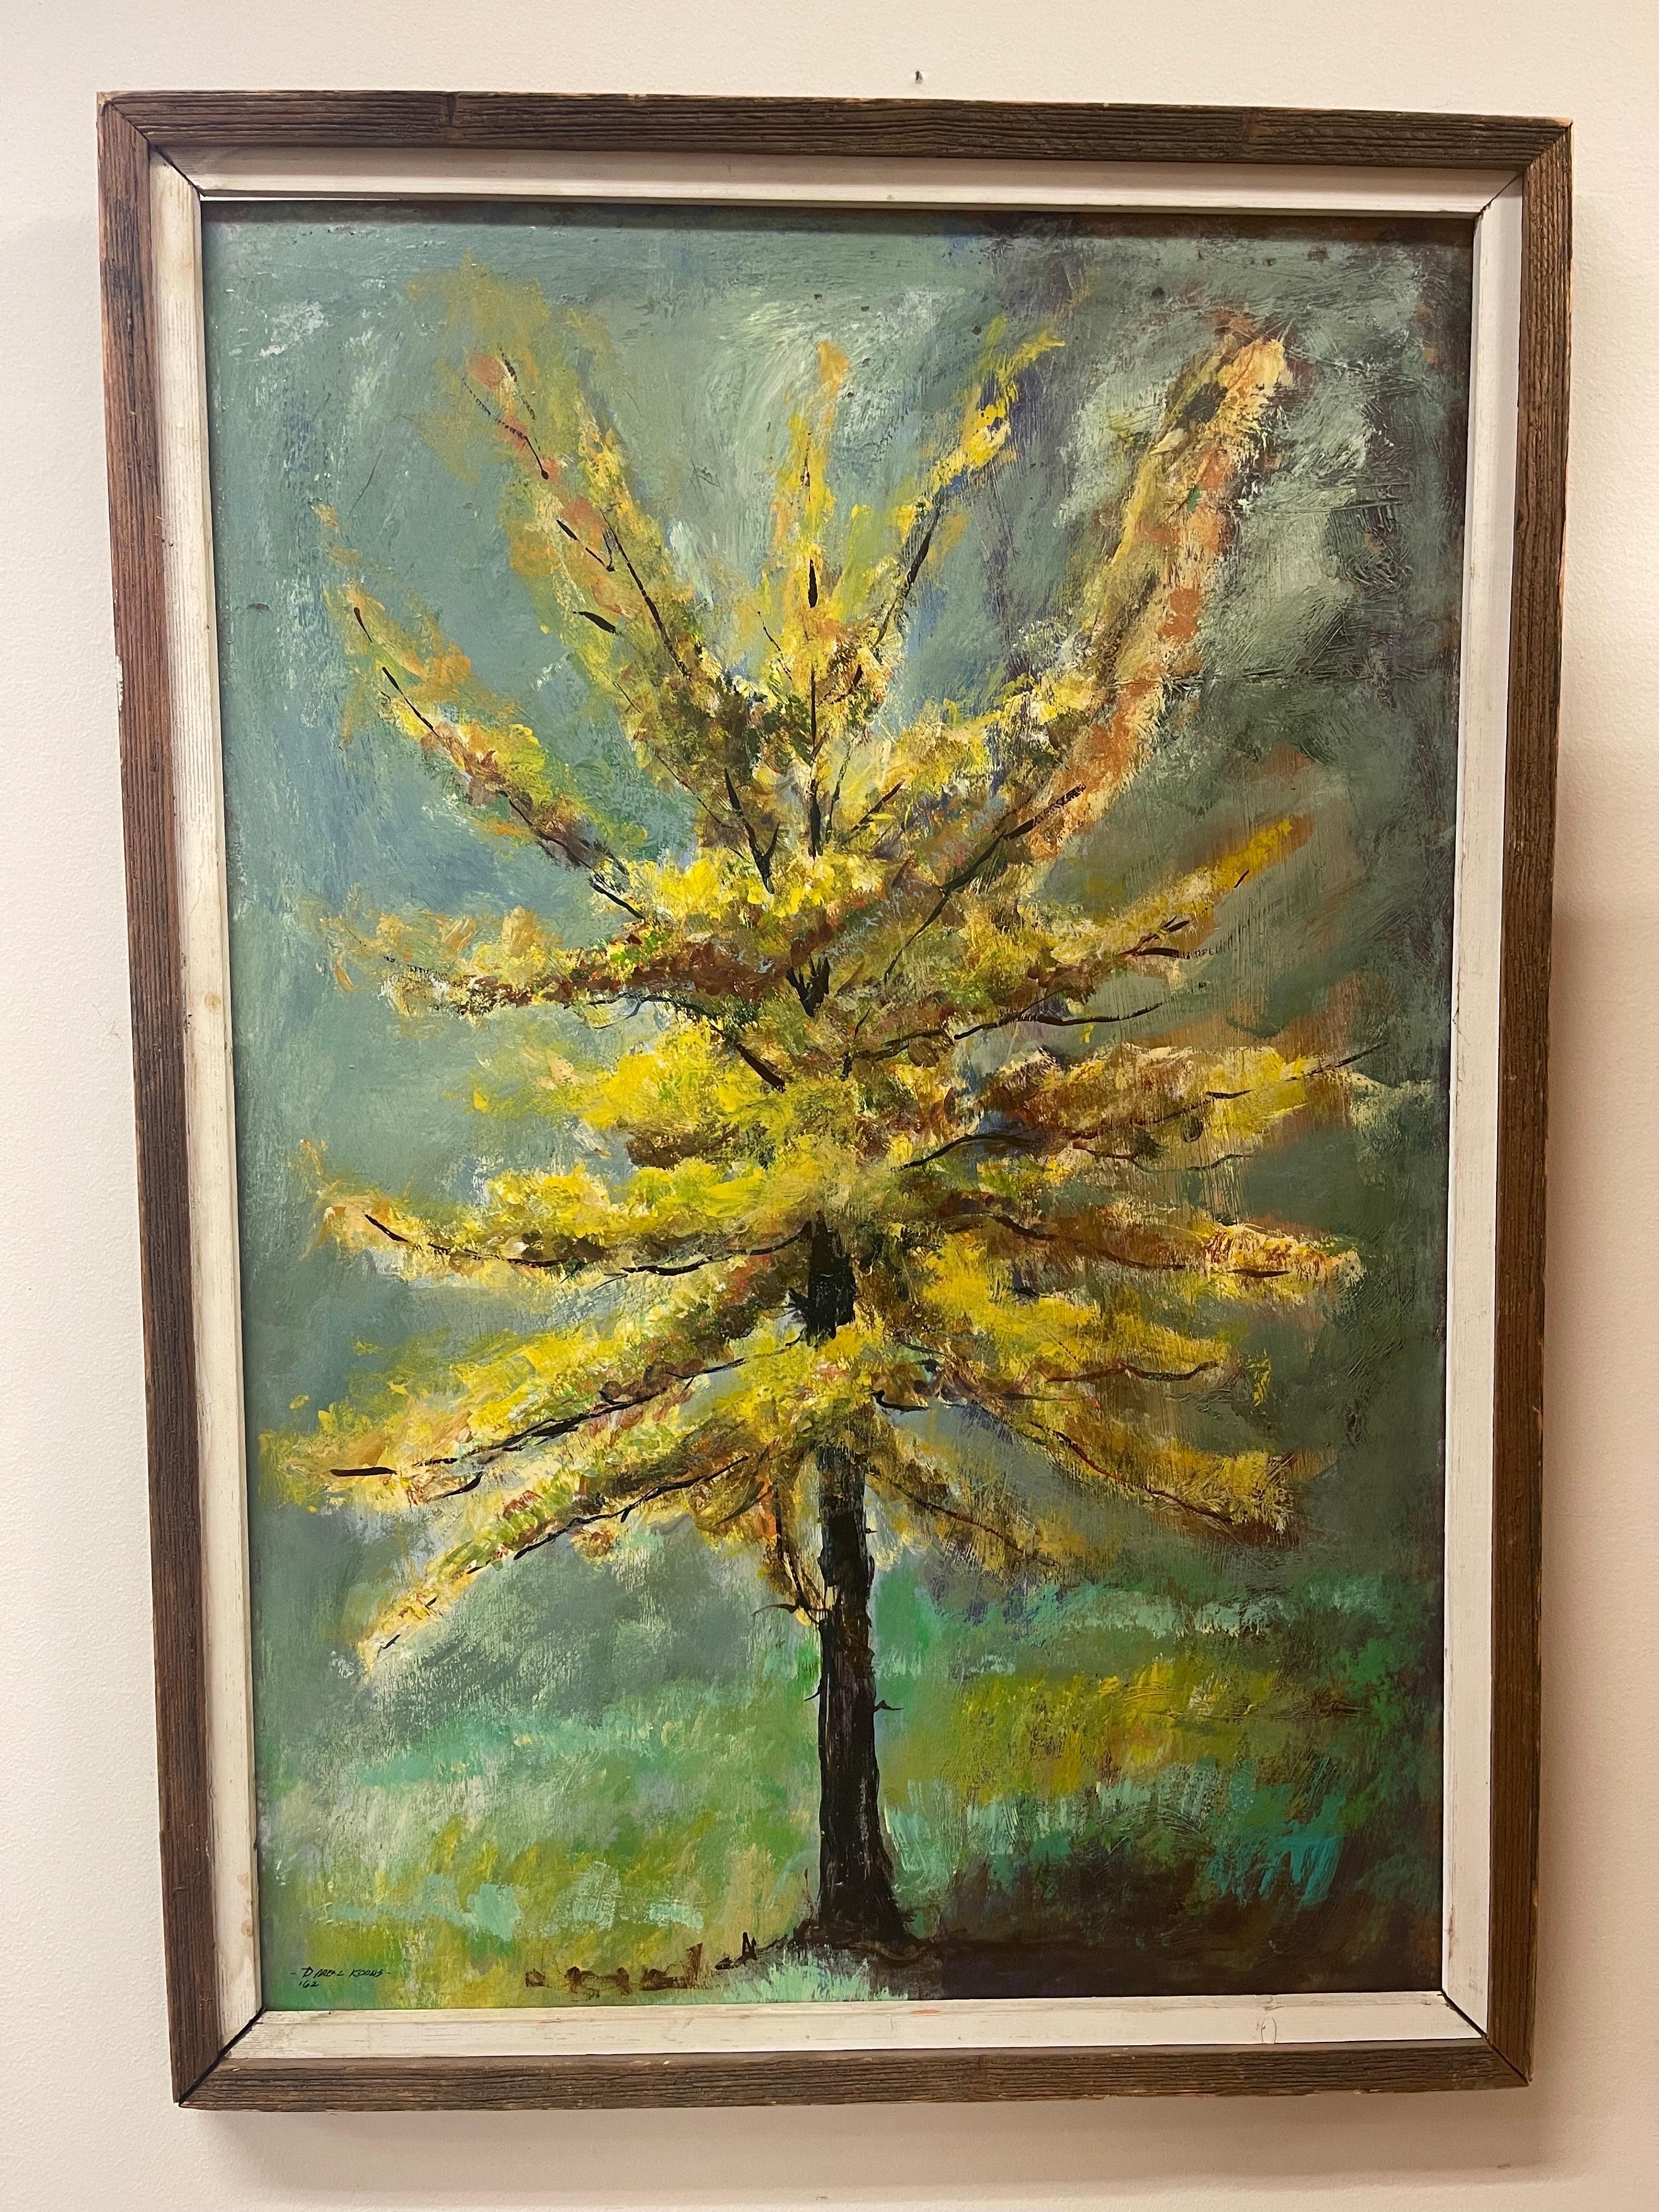 Rare original painting on masonite by well listed artist Darell Koons. Signed at bottom left and circa 1962. The colors are still vibrant. Frame is wood.